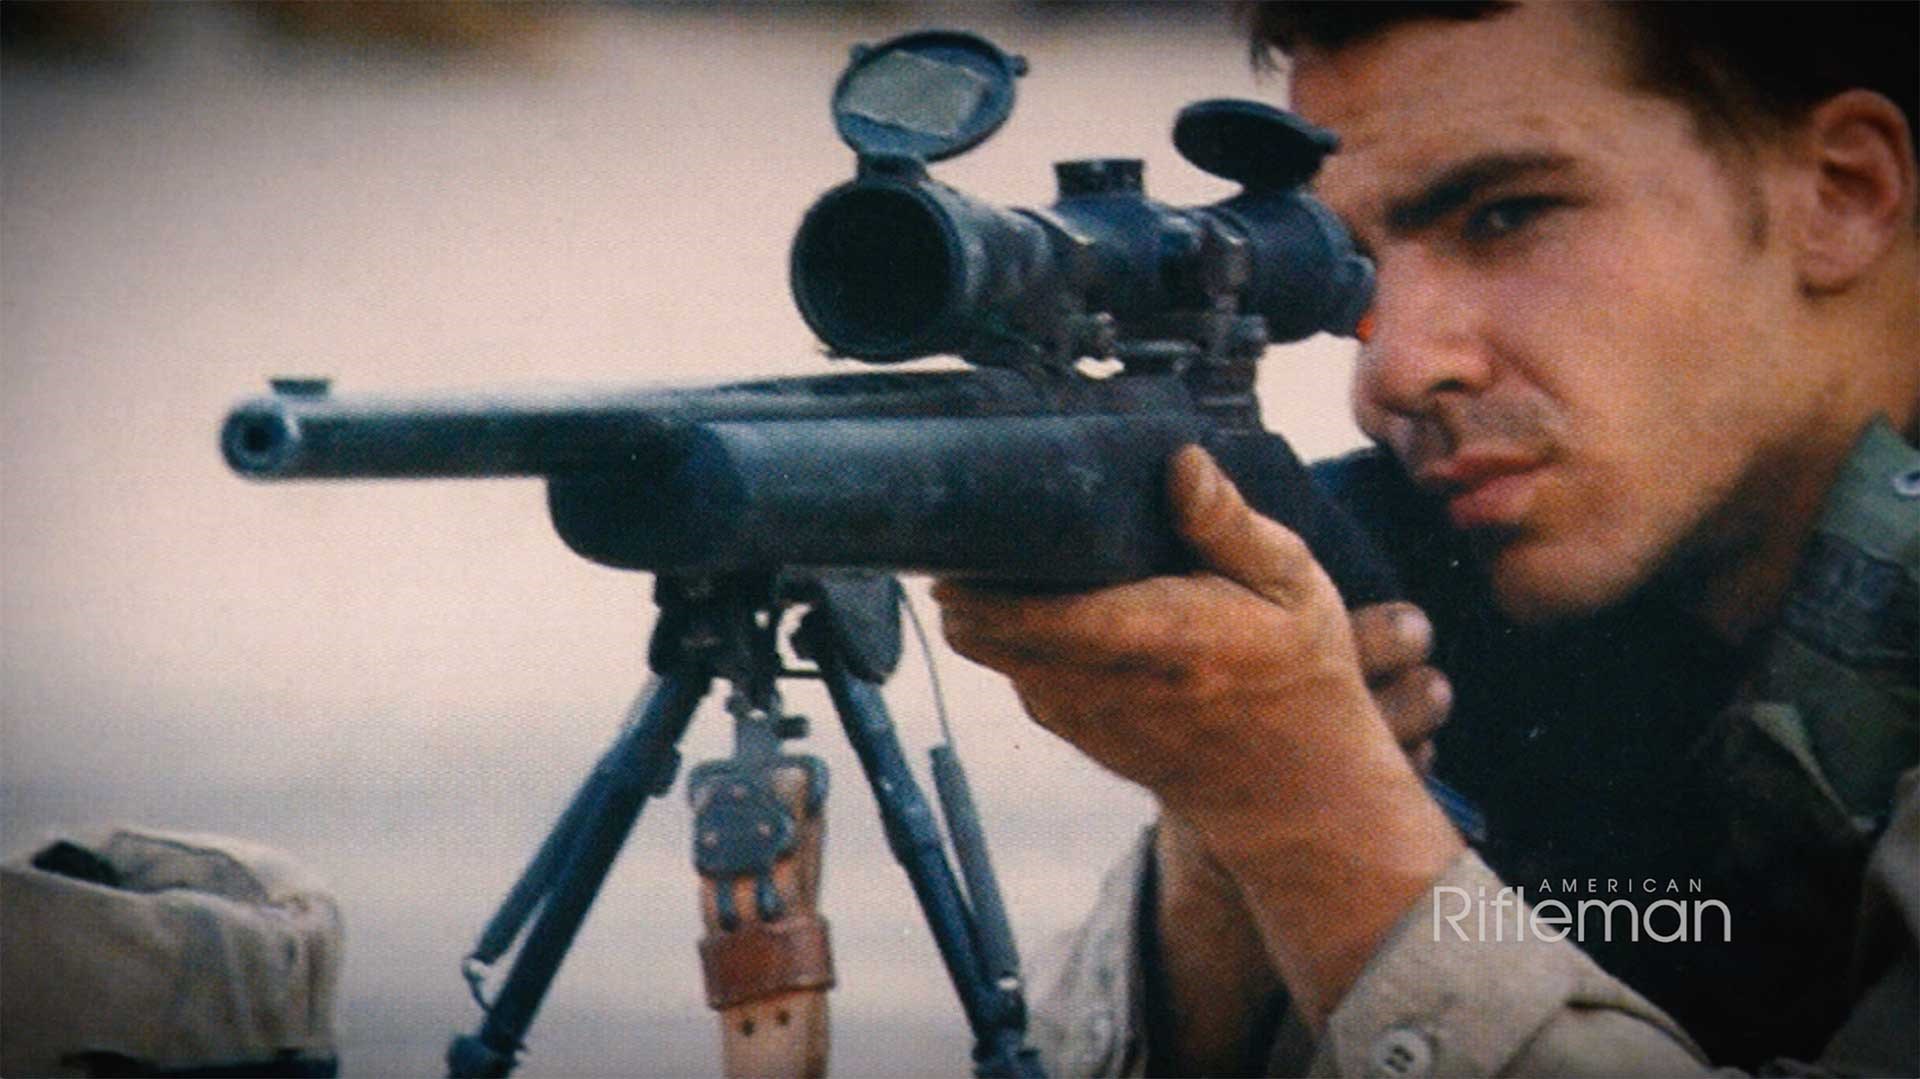 A U.S. Army soldier aiming an M24 sniper rifle equipped with a Leupold riflescope.